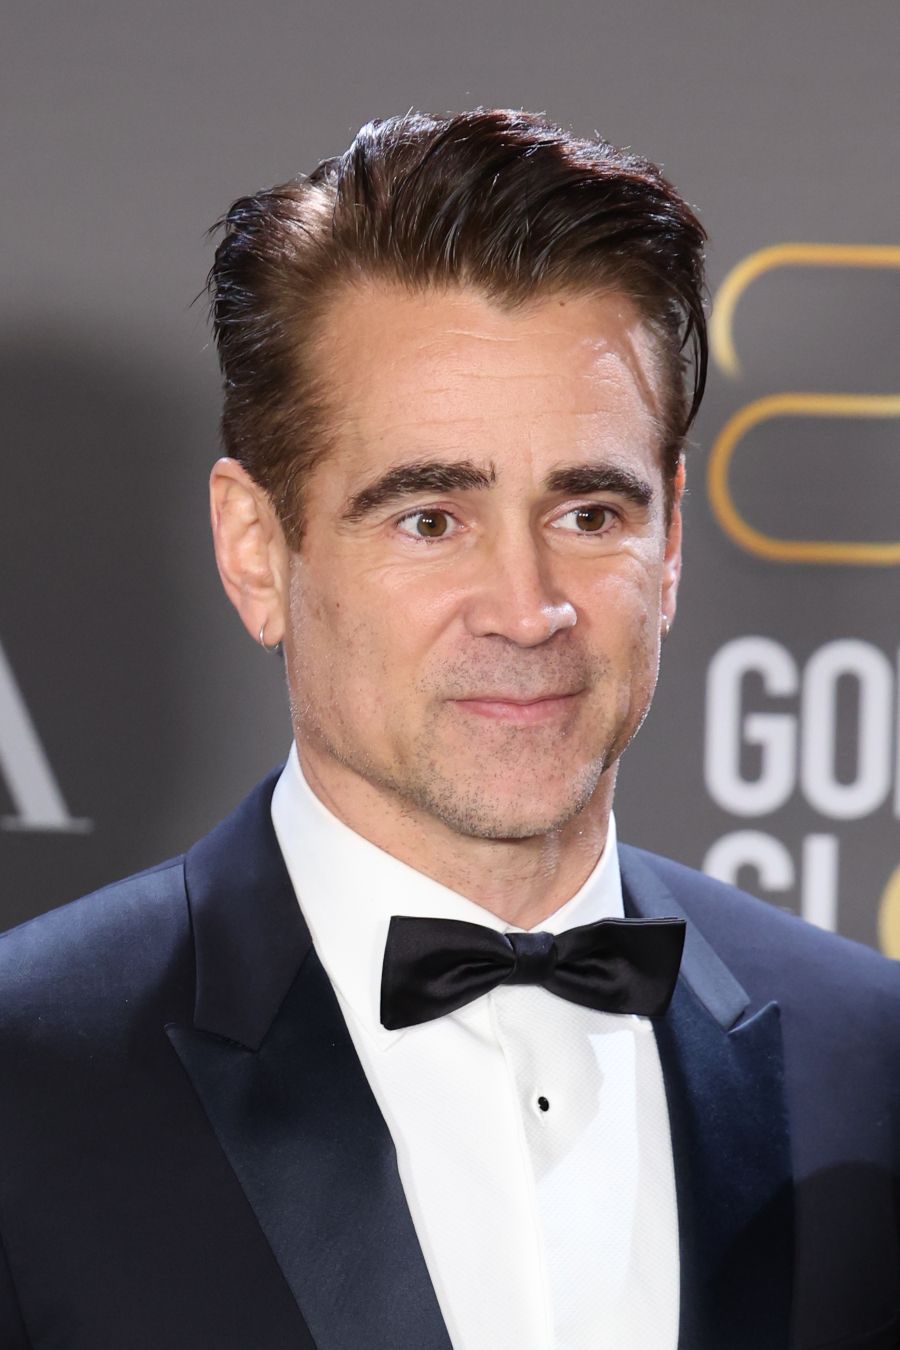 80th Annual Golden Globe Awards - Press Room BEVERLY HILLS, CALIFORNIA - JANUARY 10: Colin Farrell winners of Best Picture - Musical/Comedy for "The Banshees of Inisherin", pose in the press room during the 80th Annual Golden Globe Awards at The Beverly Hilton on January 10, 2023 in Beverly Hills, California. (Photo by Daniele Venturelli/WireImage) mens hairstyles